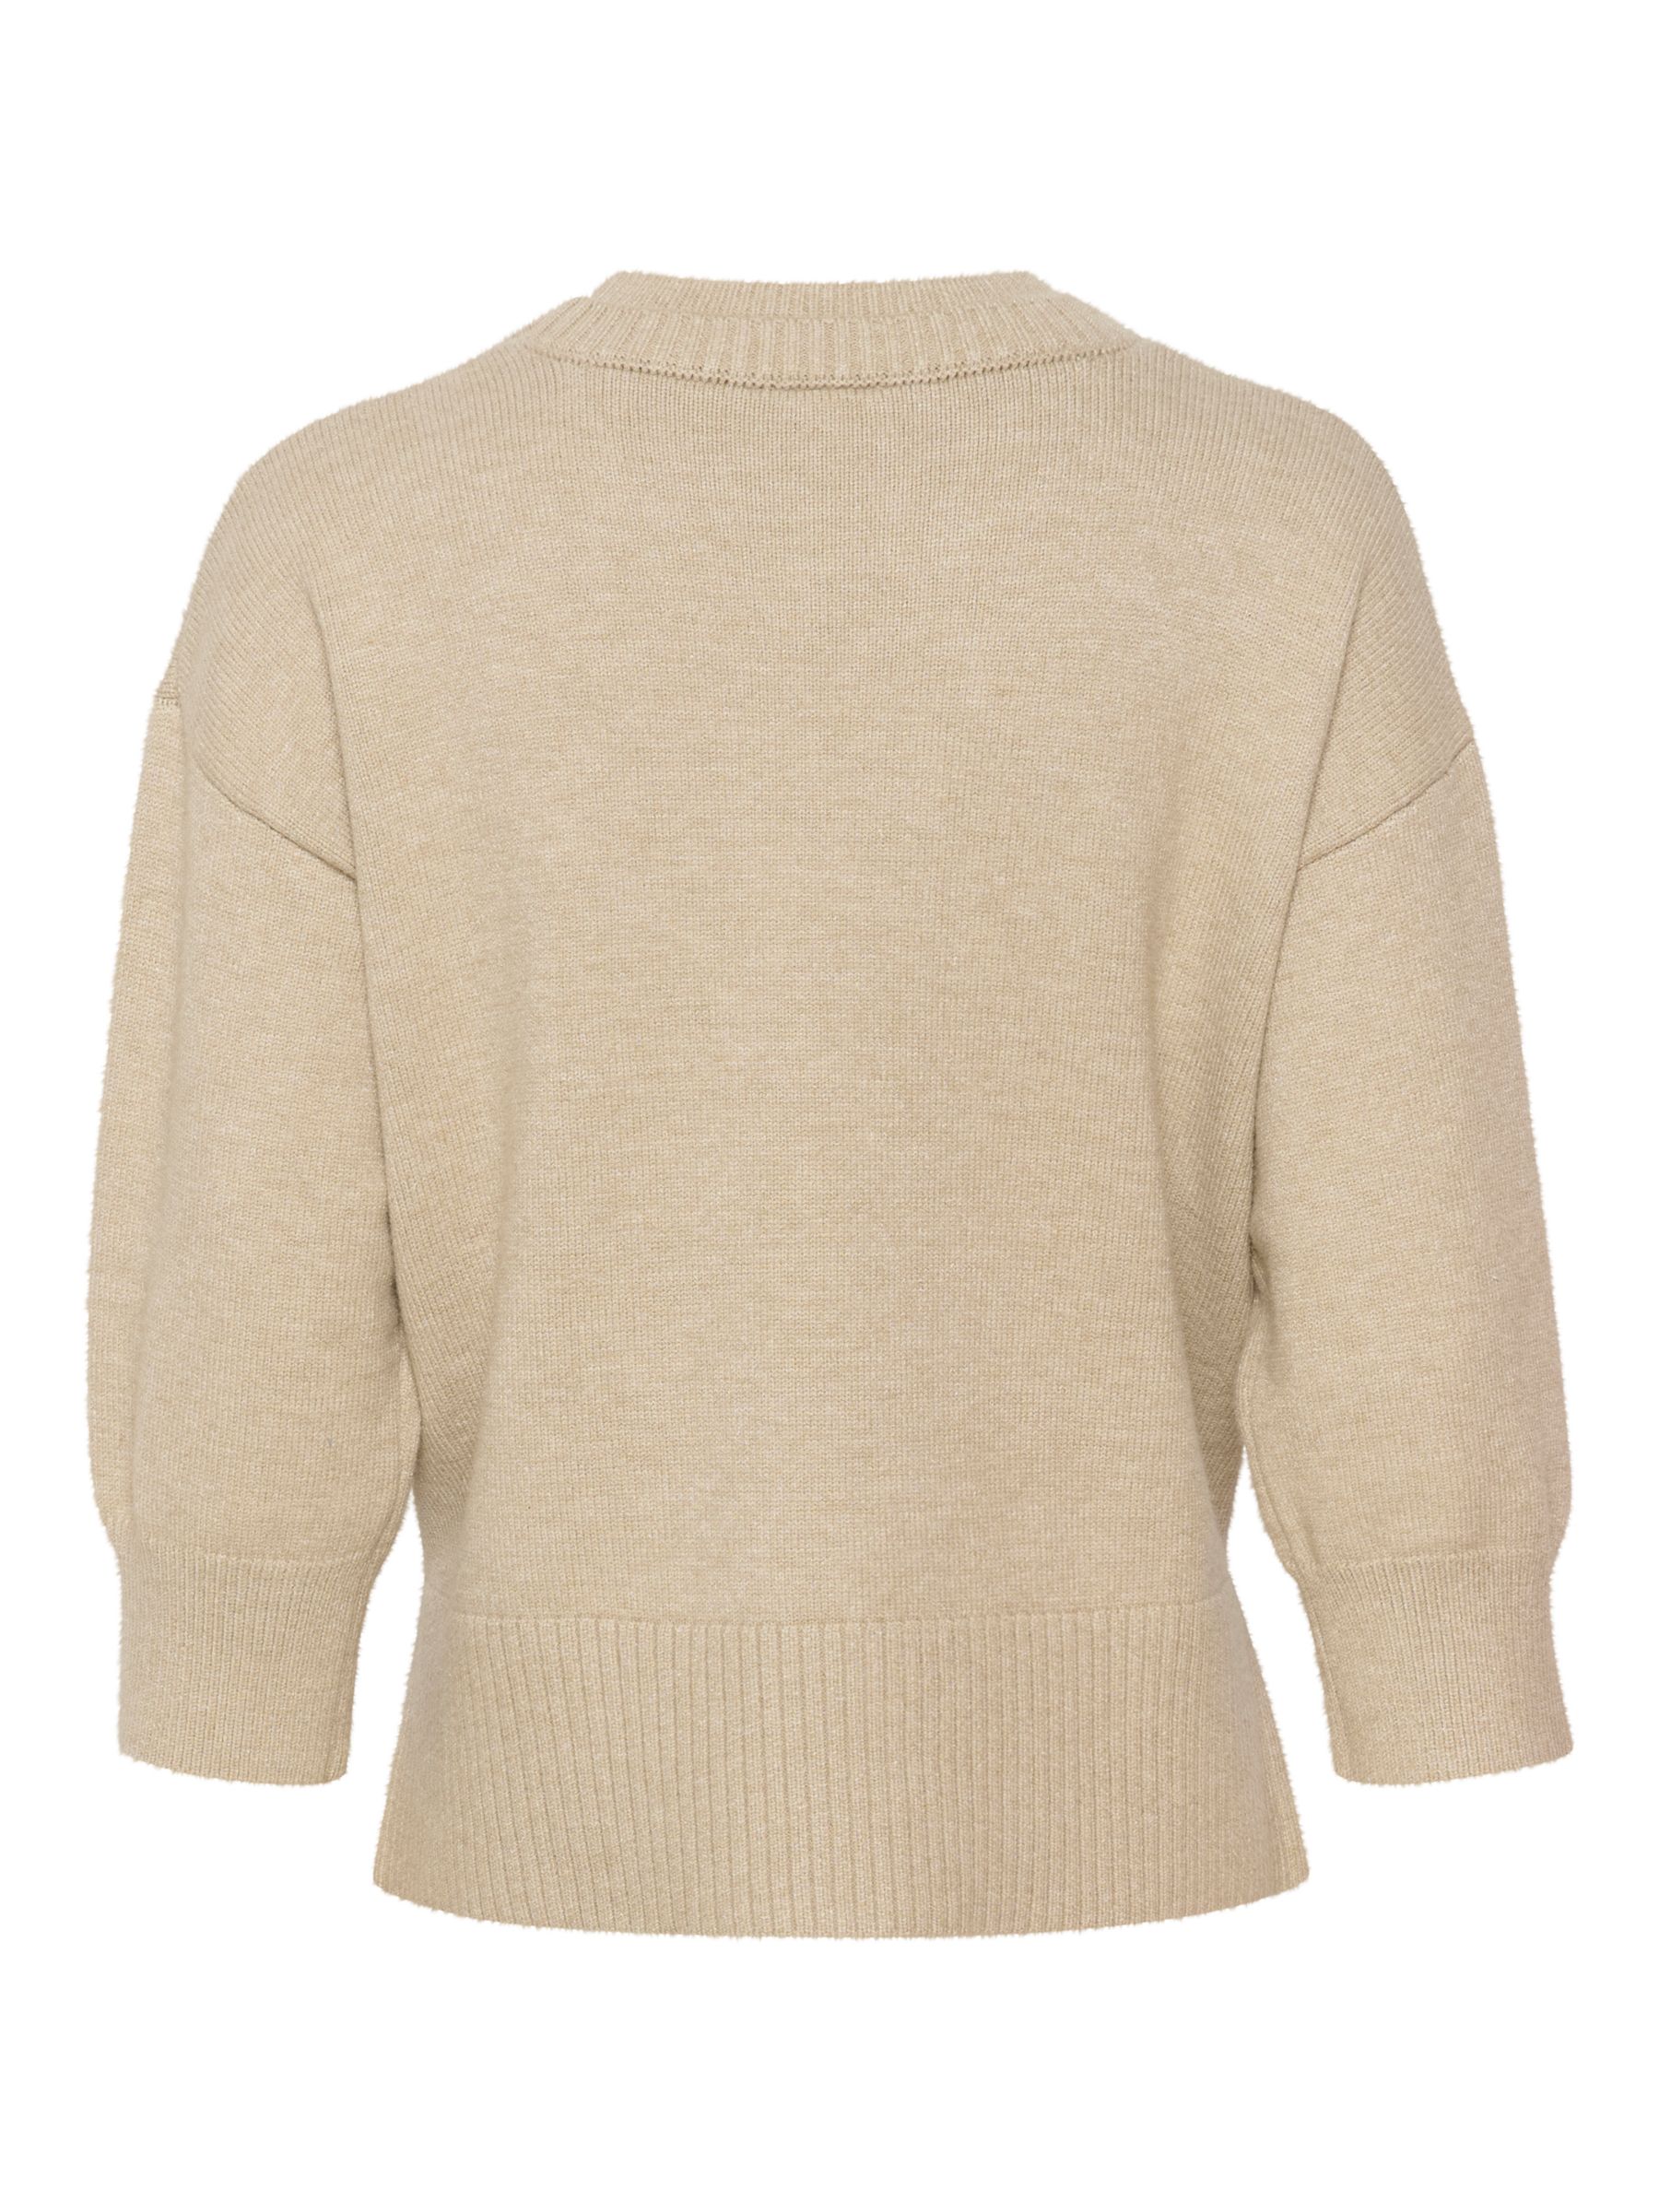 Buy KAFFE Markle Casual Fit Jumper, Feather Gray Online at johnlewis.com